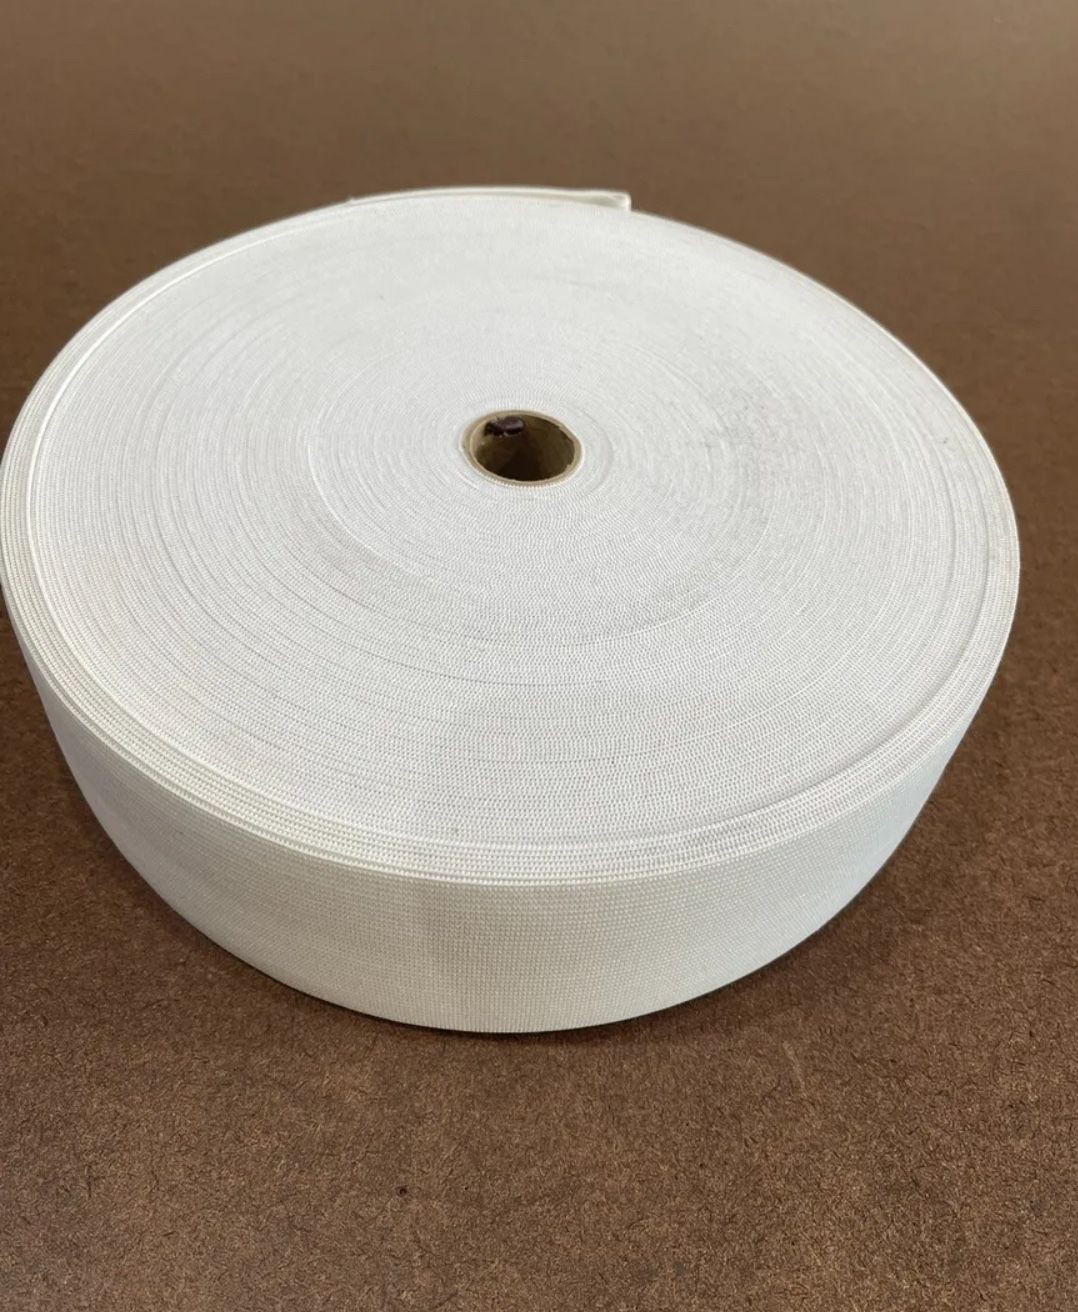 10 Yards Of White Elastic Of 2 1/2 Inches Wide 